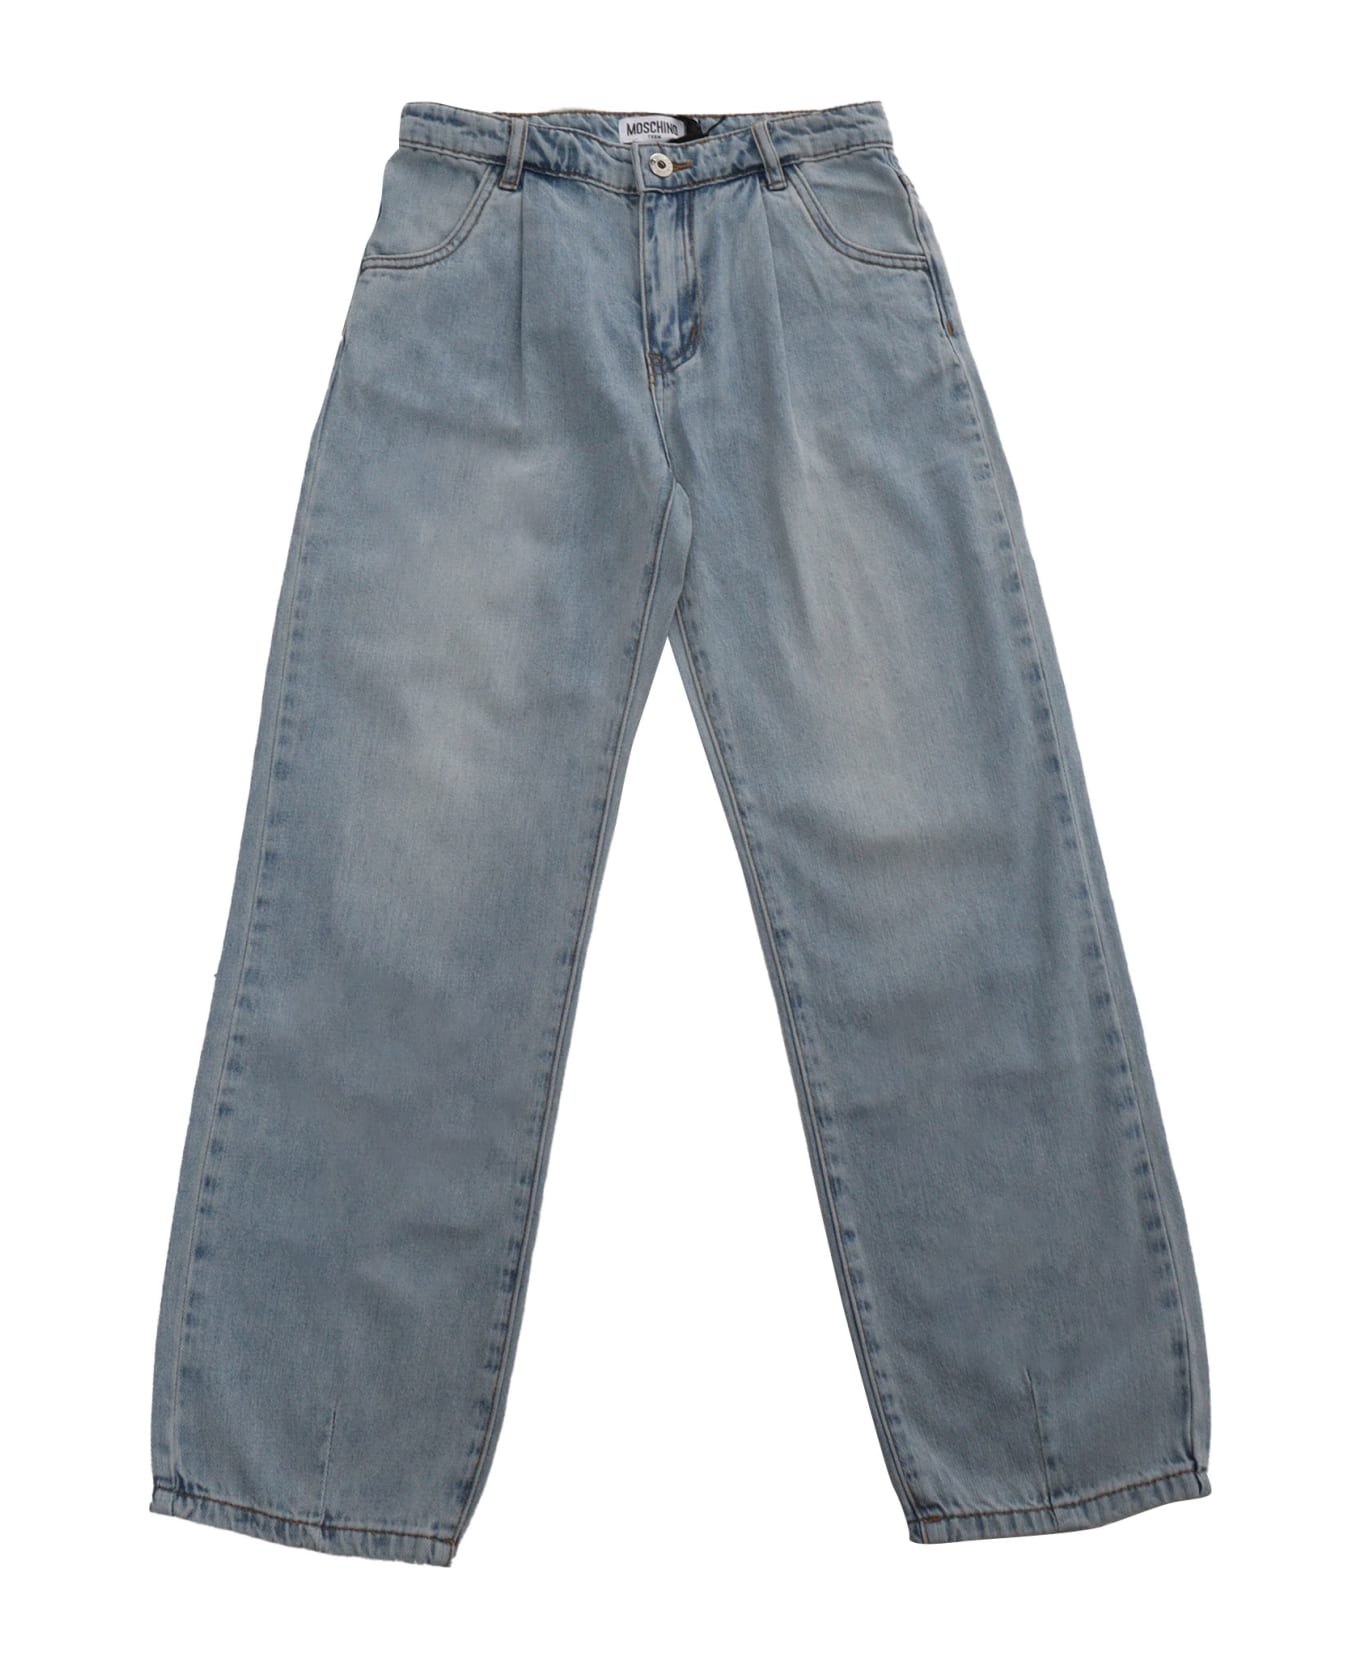 Moschino Baggy Jeans - LIGHT BLUE ボトムス